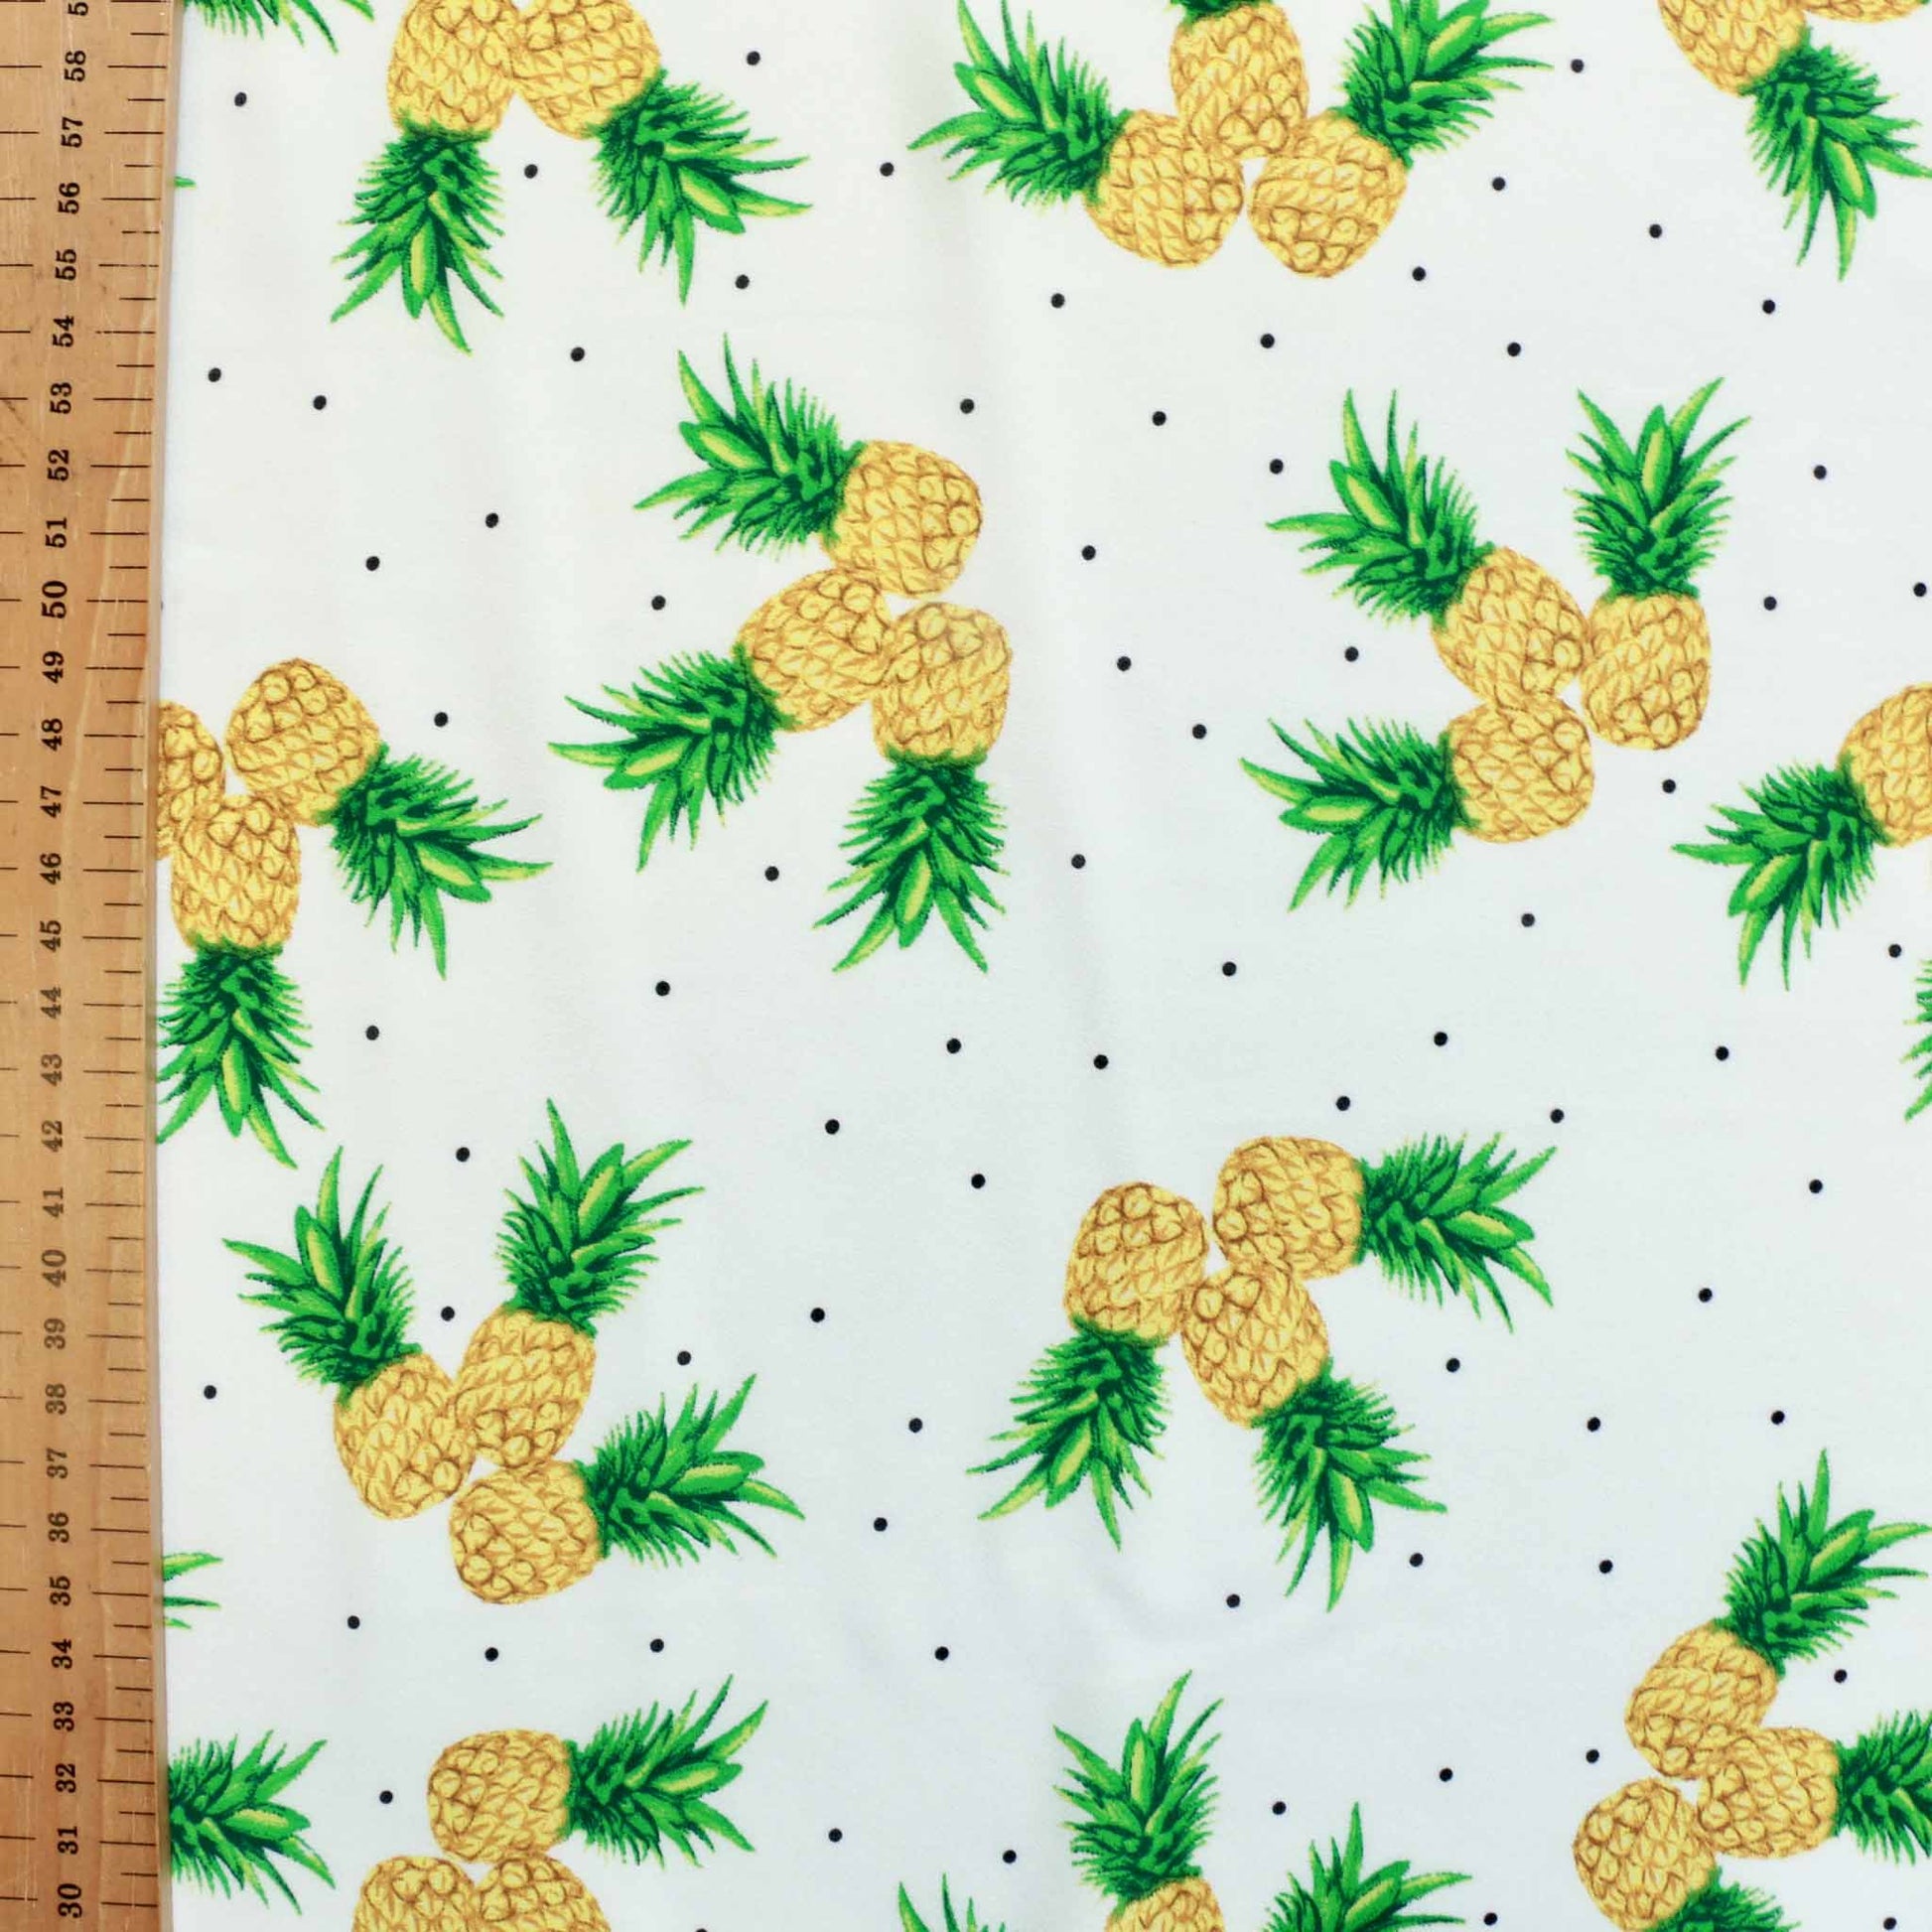 metre white georgette dressmaking fabric with printed pineapples